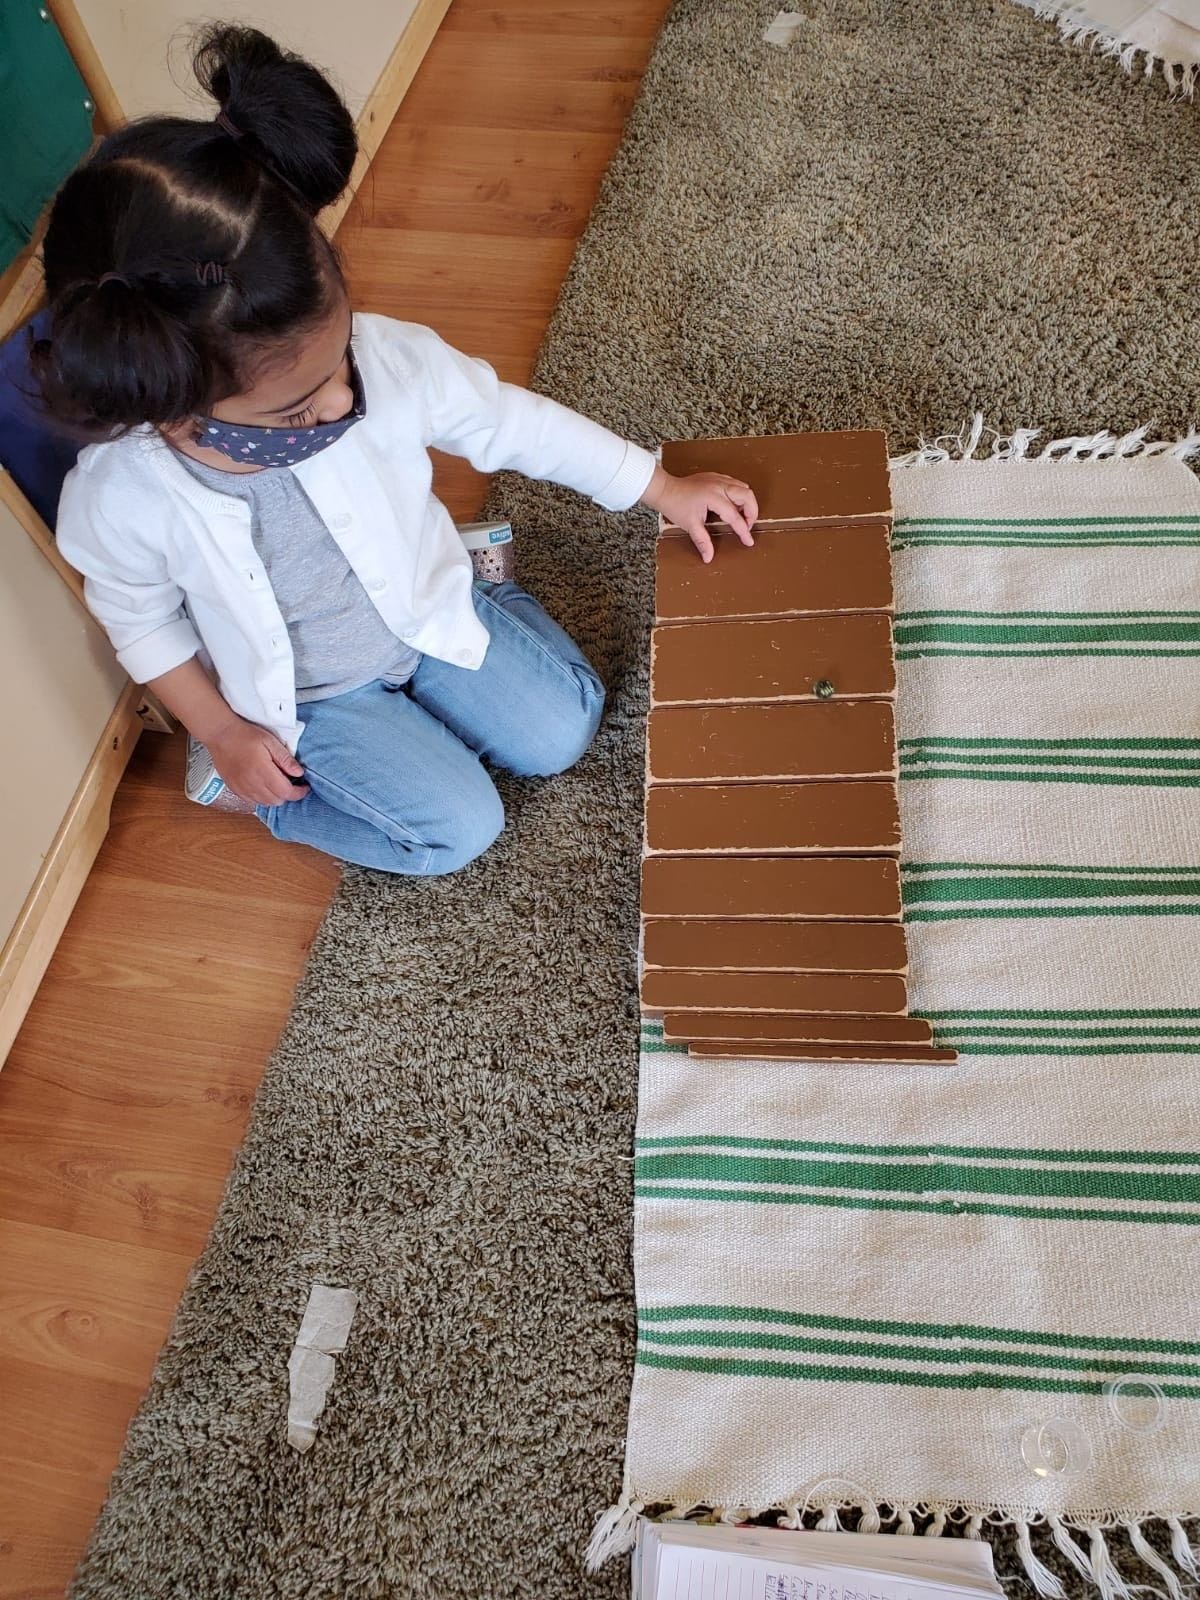 Paoli Campus: A child focused on rolling the marble on the Brown Stairs  from the thickest to thinnest. This activity helps in the refinement of Visual sense.